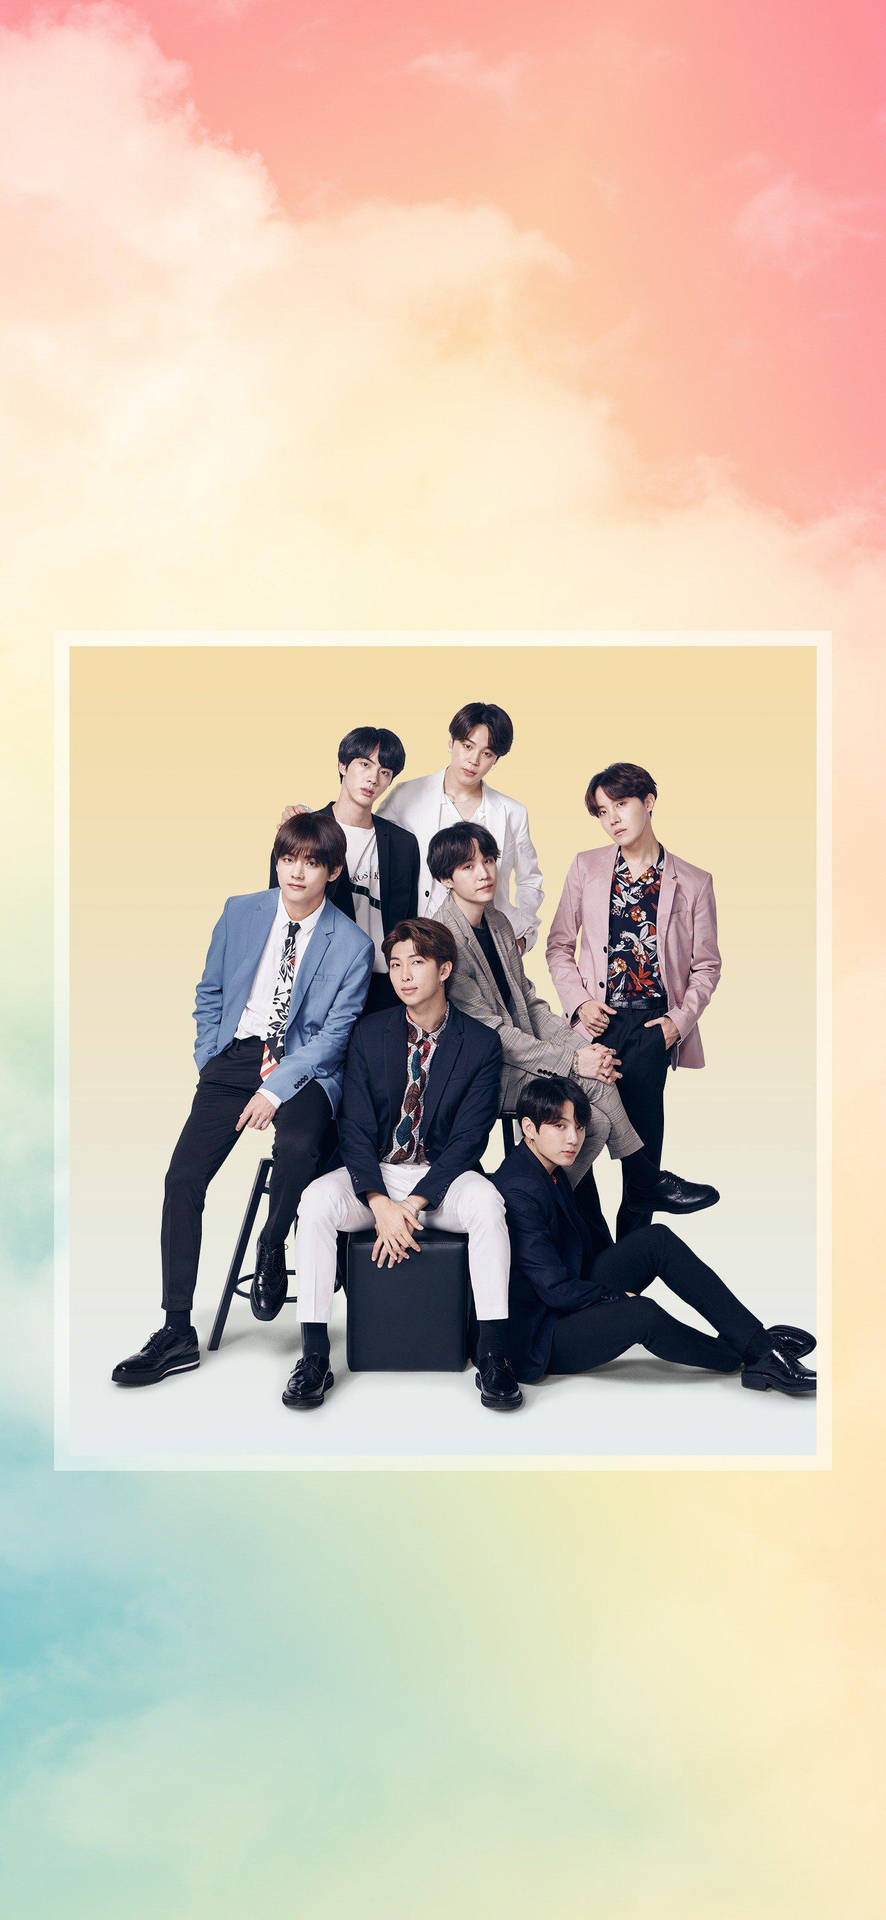 Colorful Bts Dynamite Group Photo Background